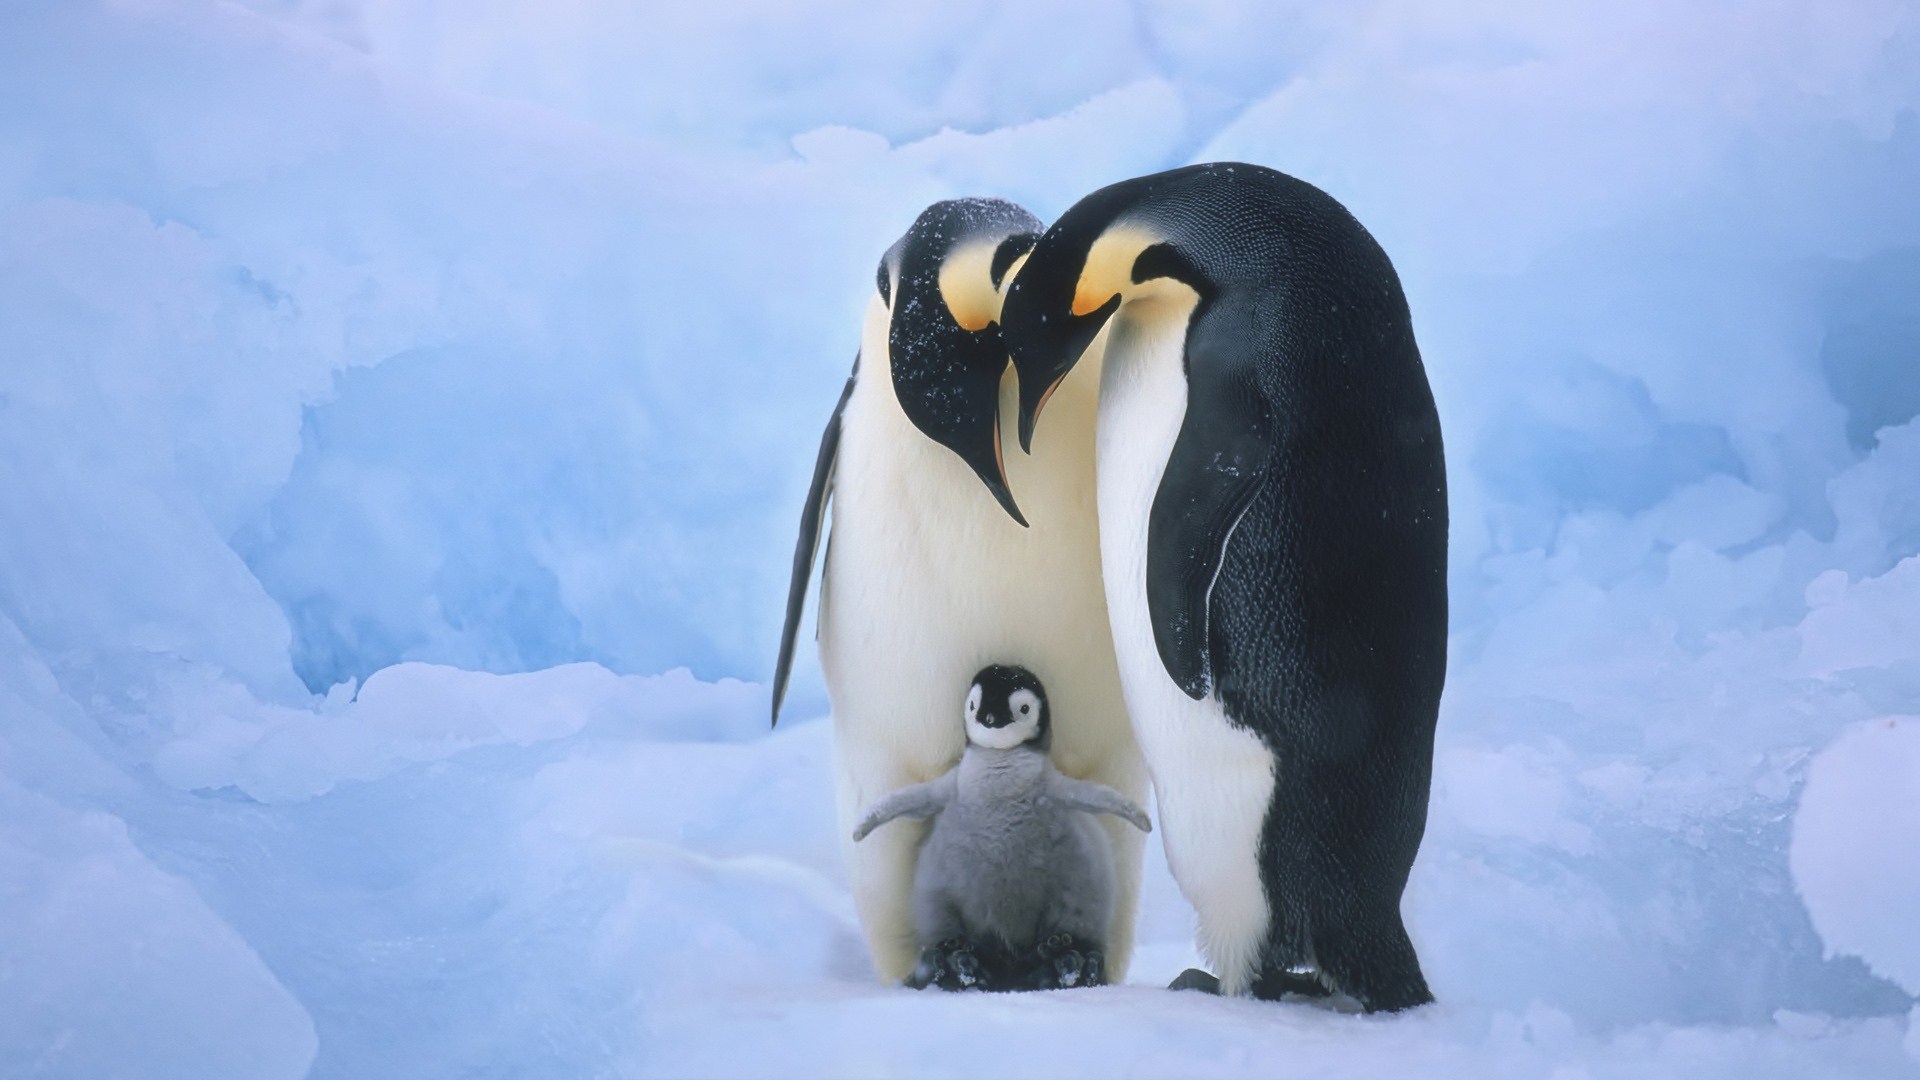 Penguins with chick in Snow Wallpaper   Wallpaper Stream